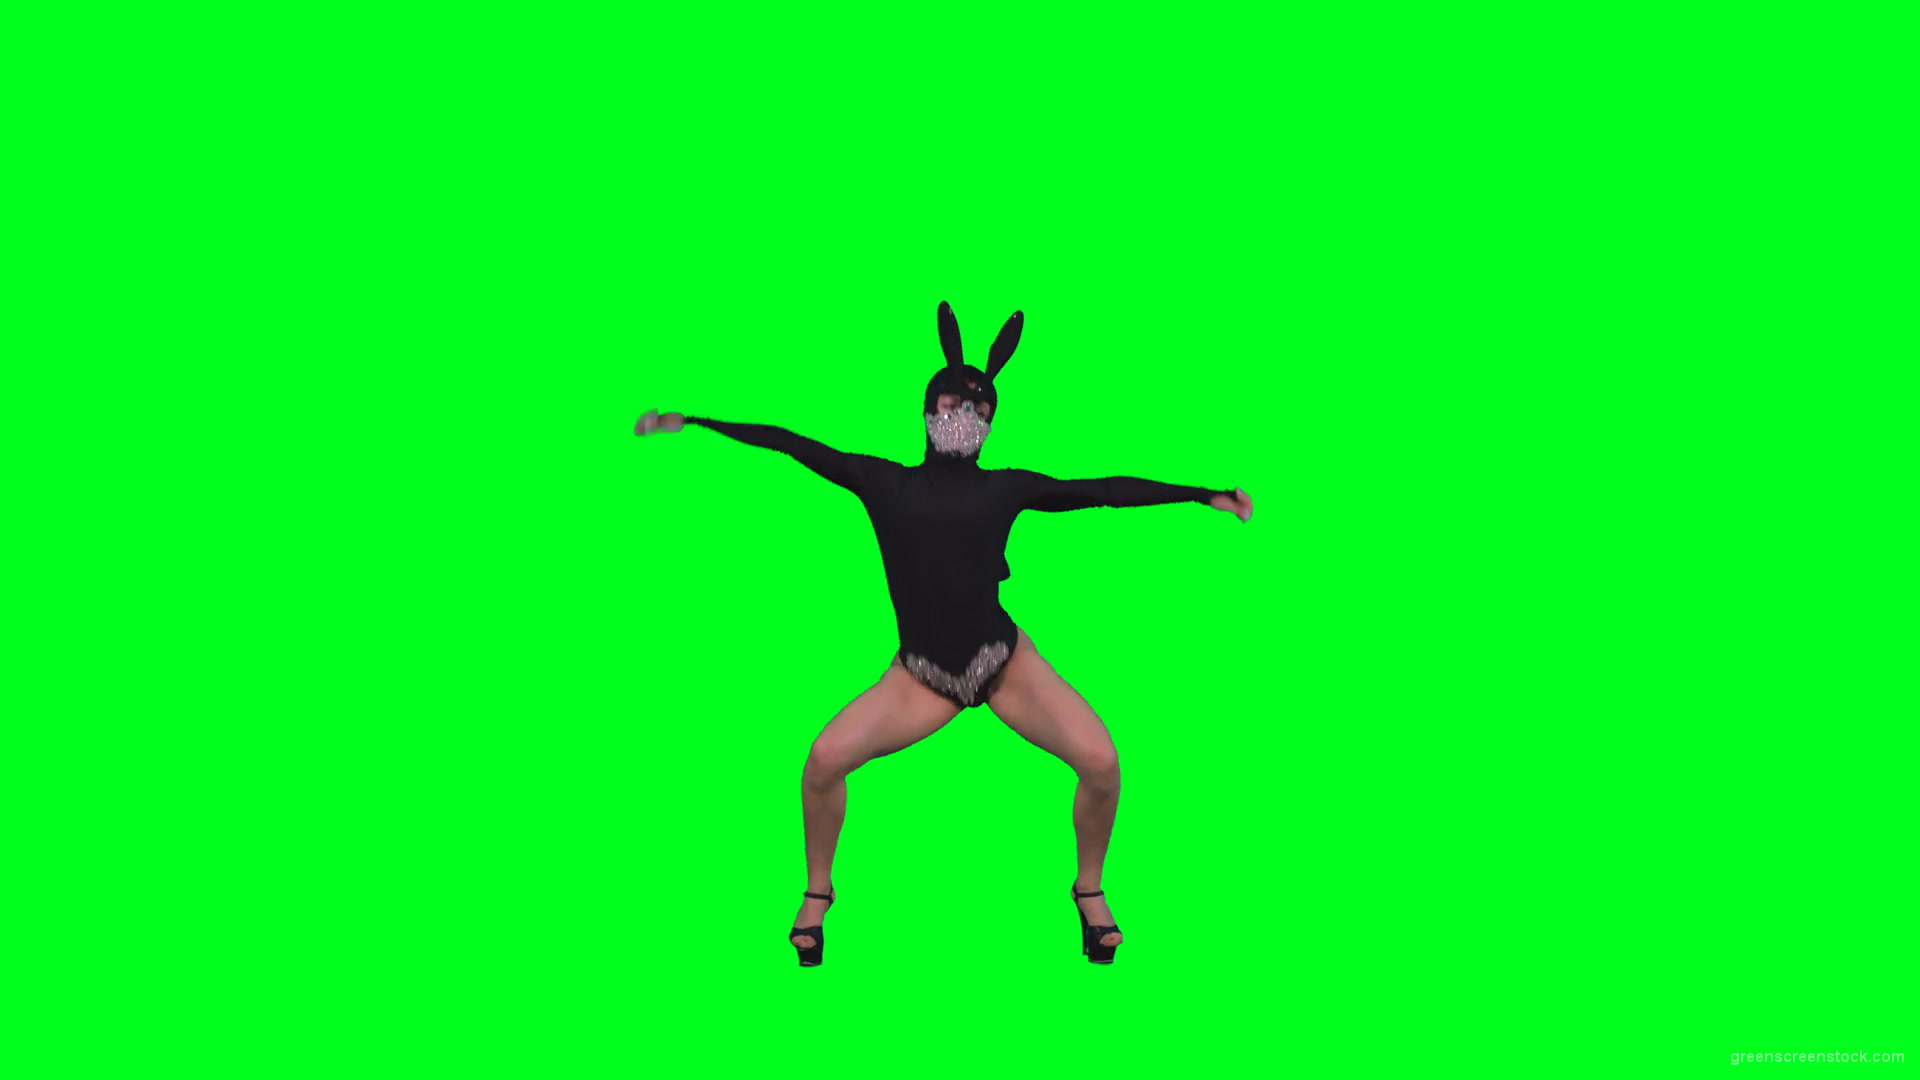 Sexy-dancing-girl-in-rabbit-mask-and-black-fashion-dress-posing-in-fetish-style-isolated-on-green-screen-4K-Video-Footage-1920_008 Green Screen Stock